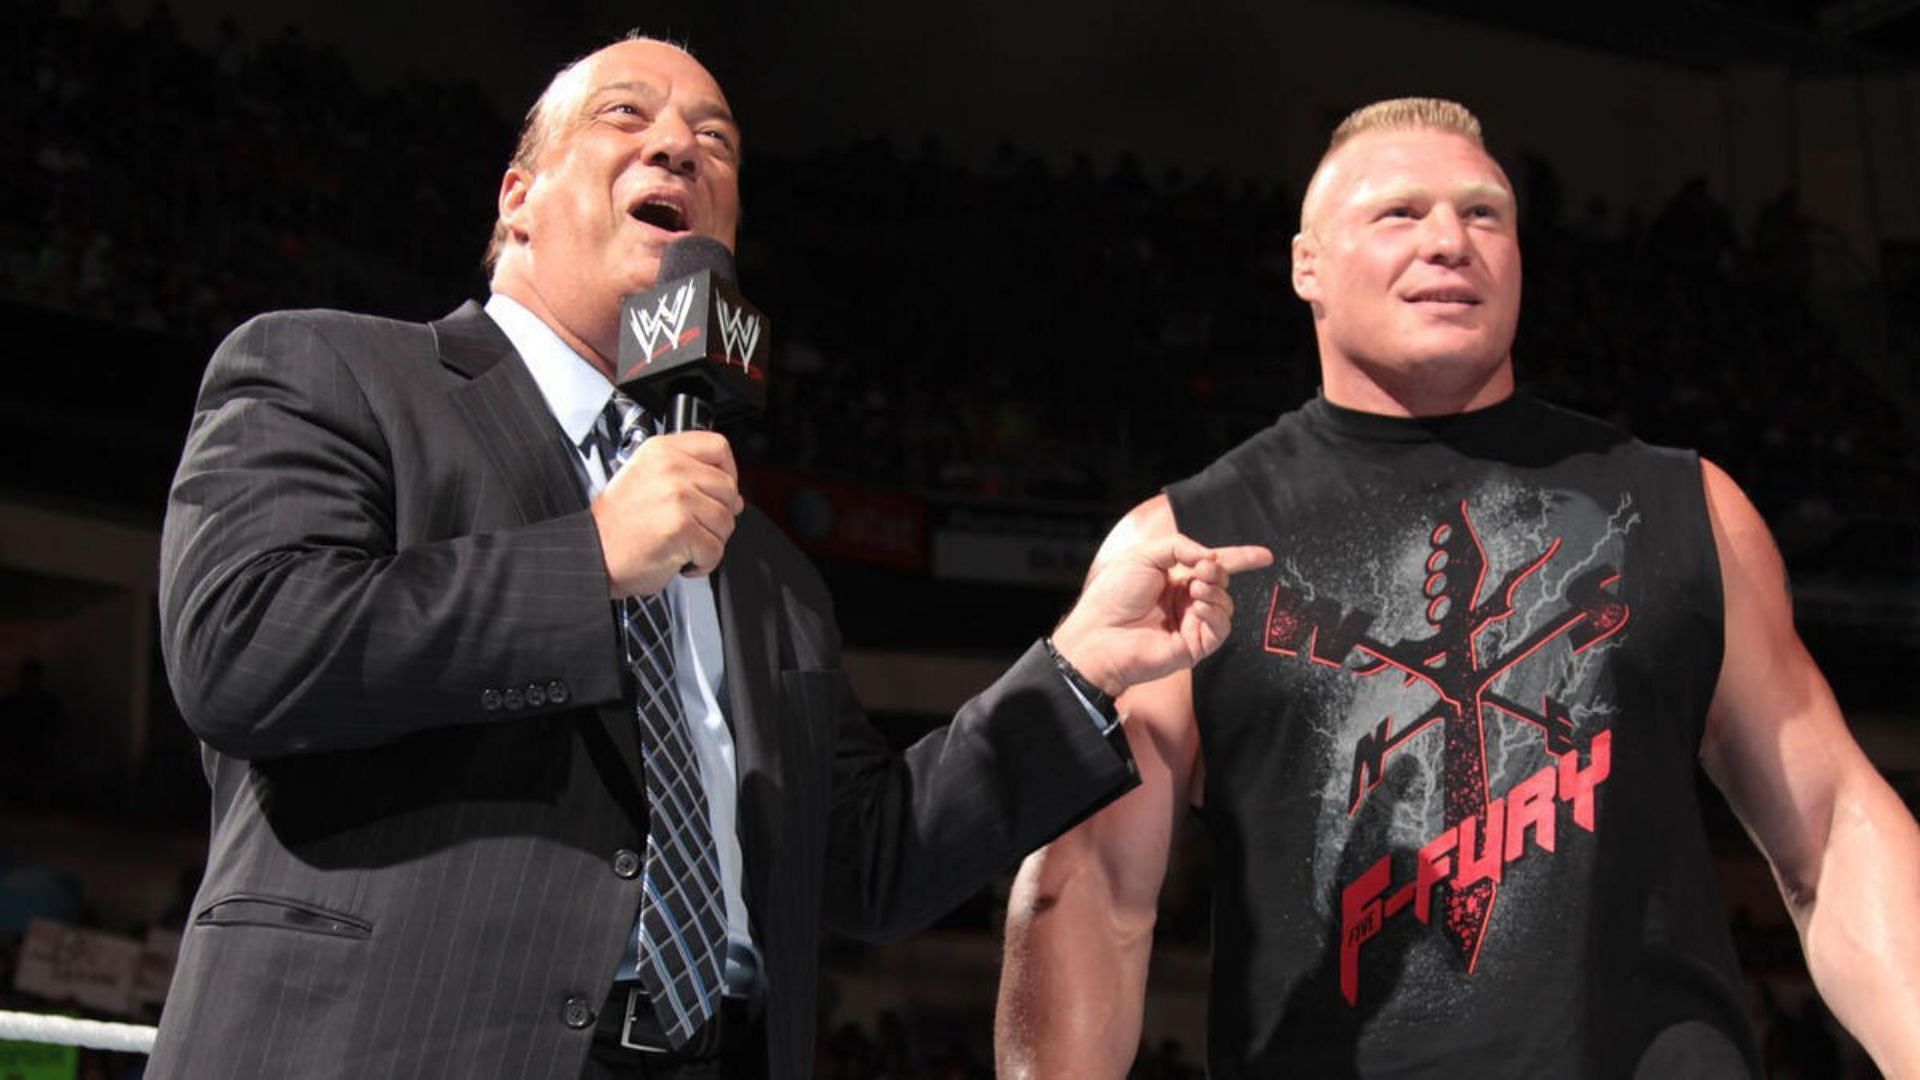 Paul Heyman and Brock Lesnar were a formidable duo